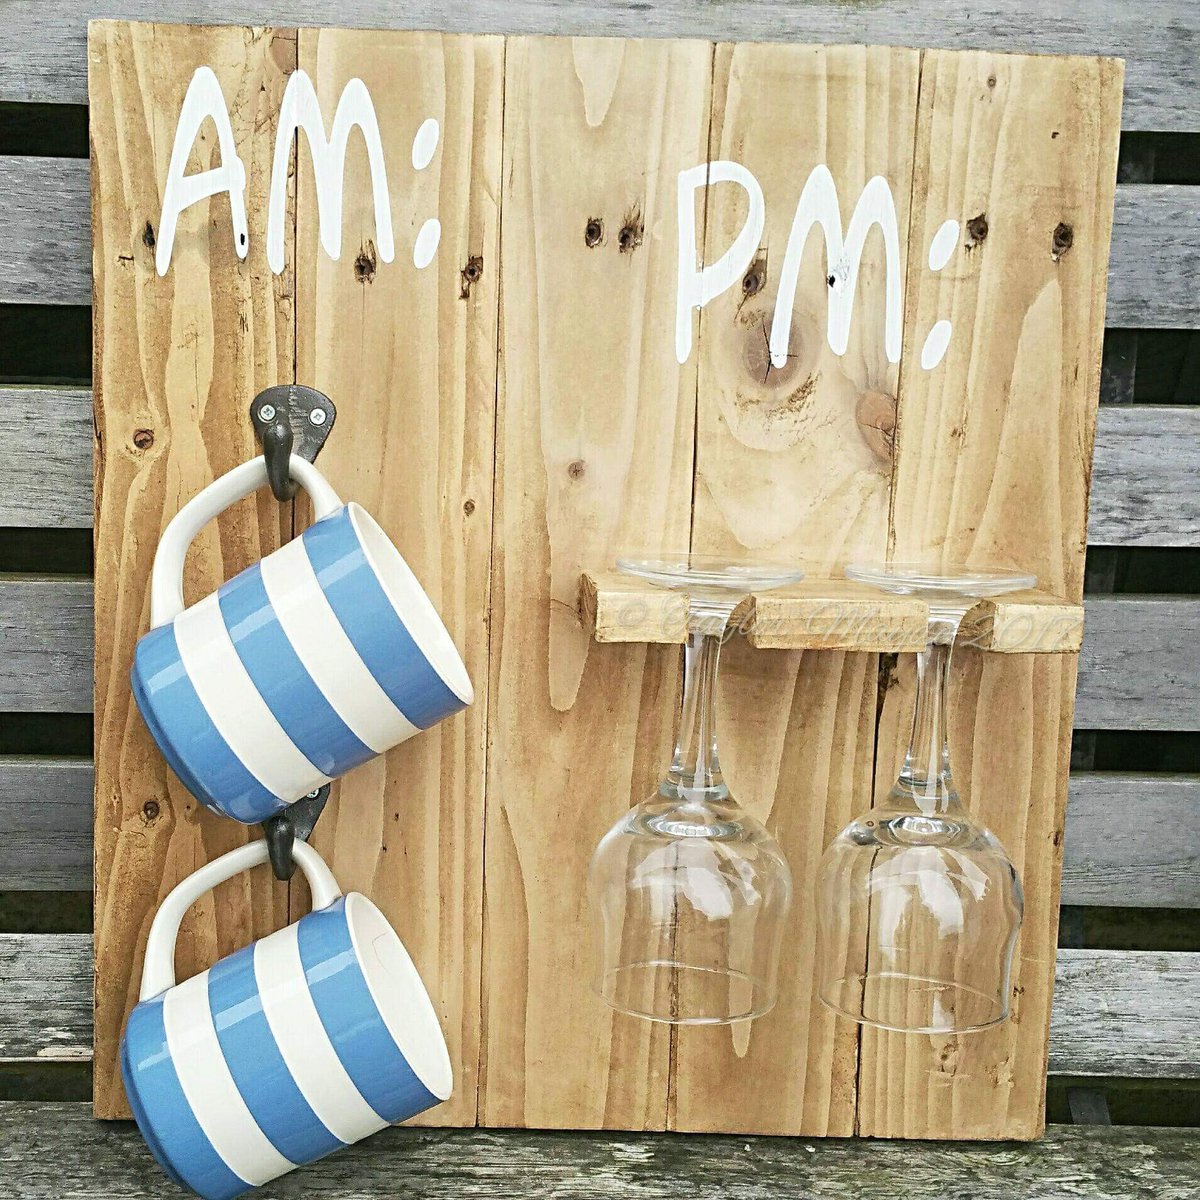 Is it PM yet?! Hope you all have a great Friday ♡ etsy.me/3ilmFWb Custom gifts for all ocassions ♡ #Christmas2022 #Gift #etsyshop #fridaymorning #fun #home #MHHSBD #MJNWVIP #UKMakers #CraftBizParty #win #morningmotivation #EarlyBiz #shop #onlineshopping